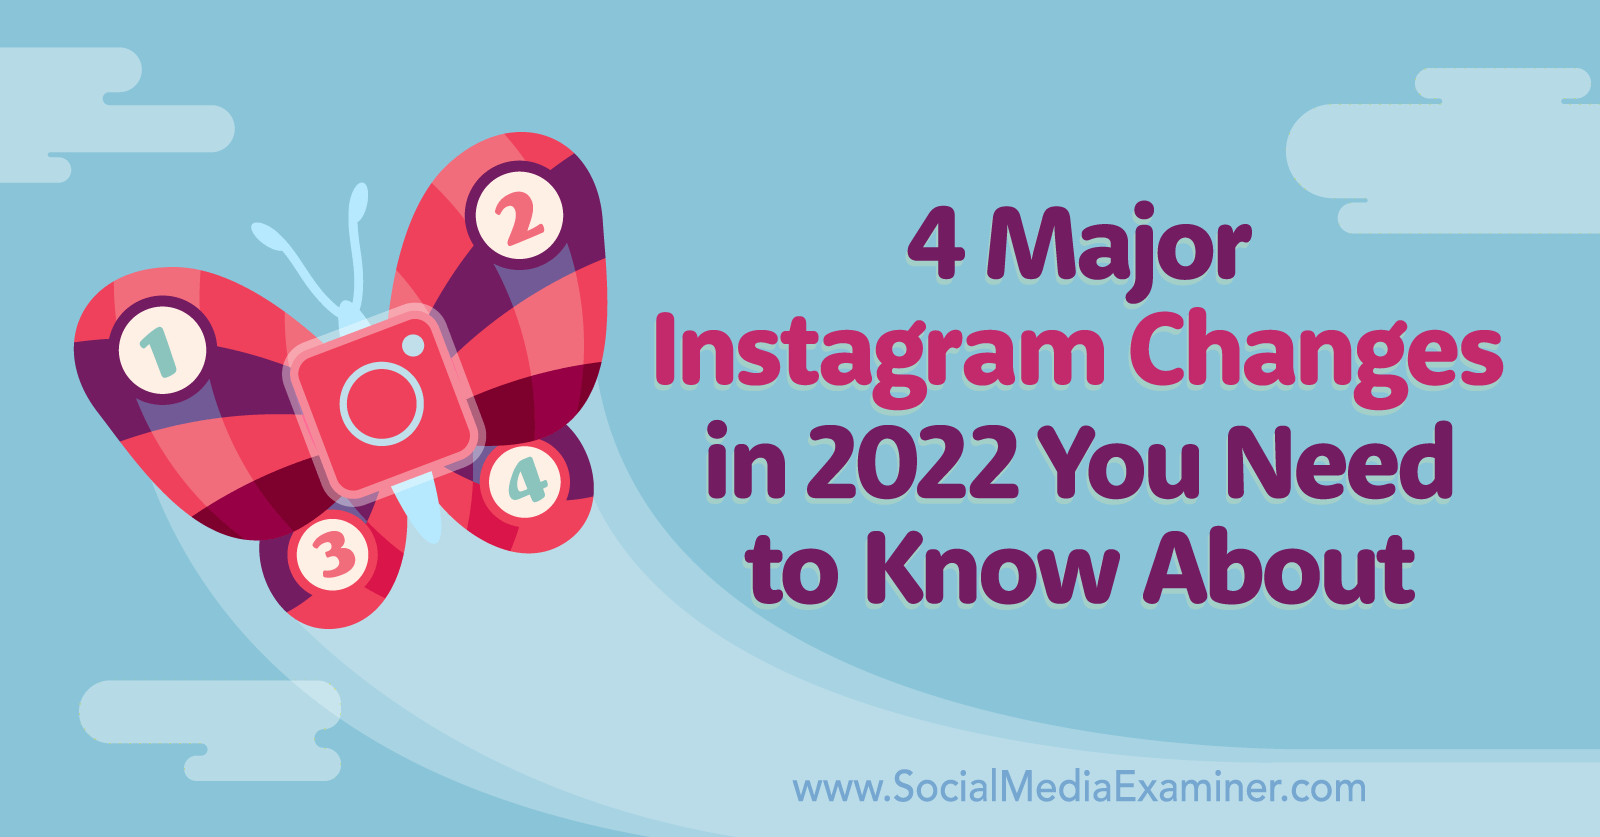 4 Major Instagram Changes in 2022 You Need to Know About by Marly Broudie on Social Media Examiner.